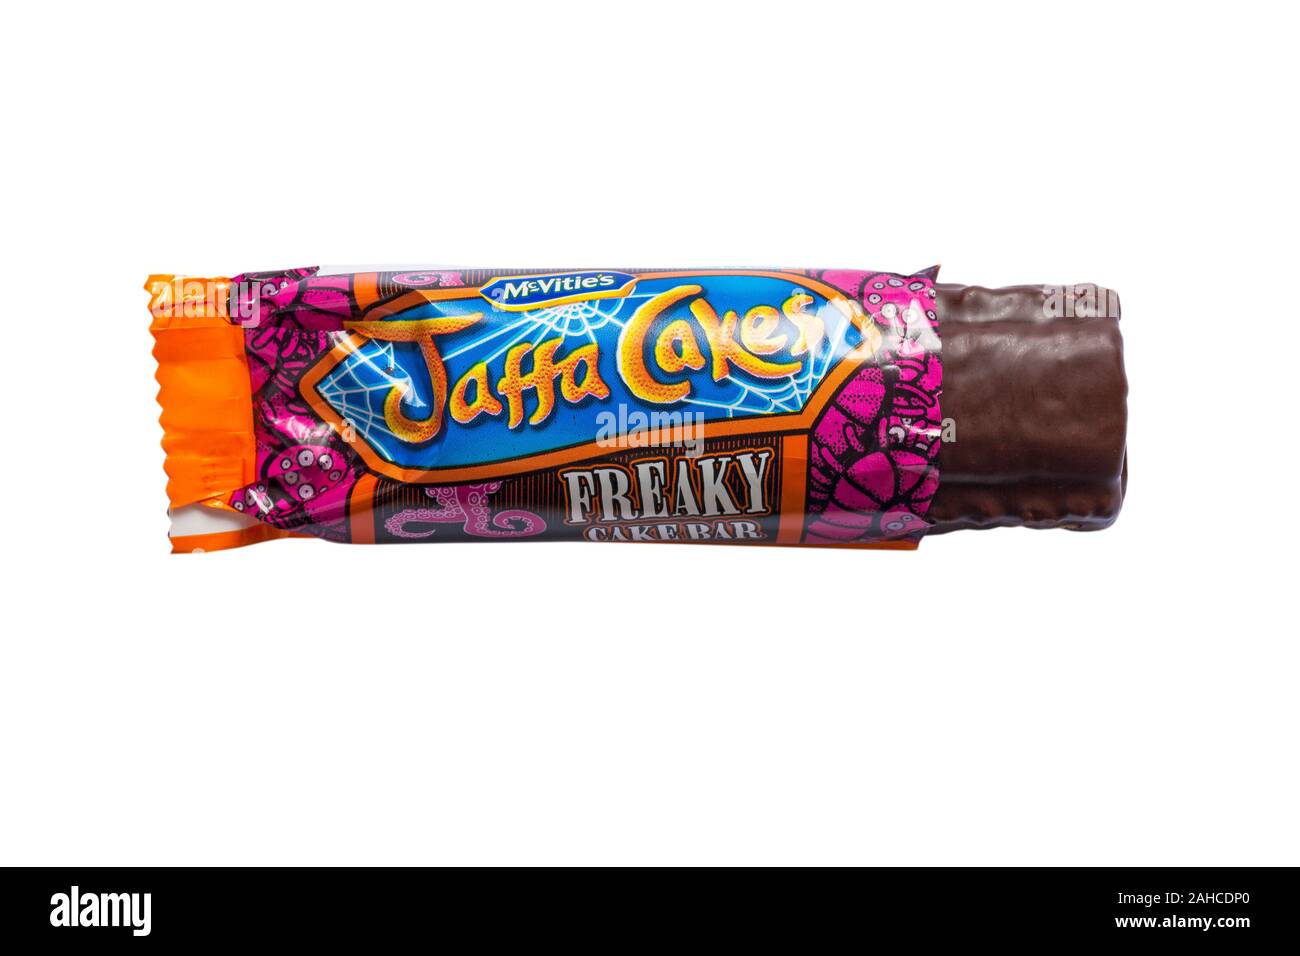 McVities Jaffa Cakes freaky cake bar opened to show contents ready for Halloween isolated on white background Stock Photo